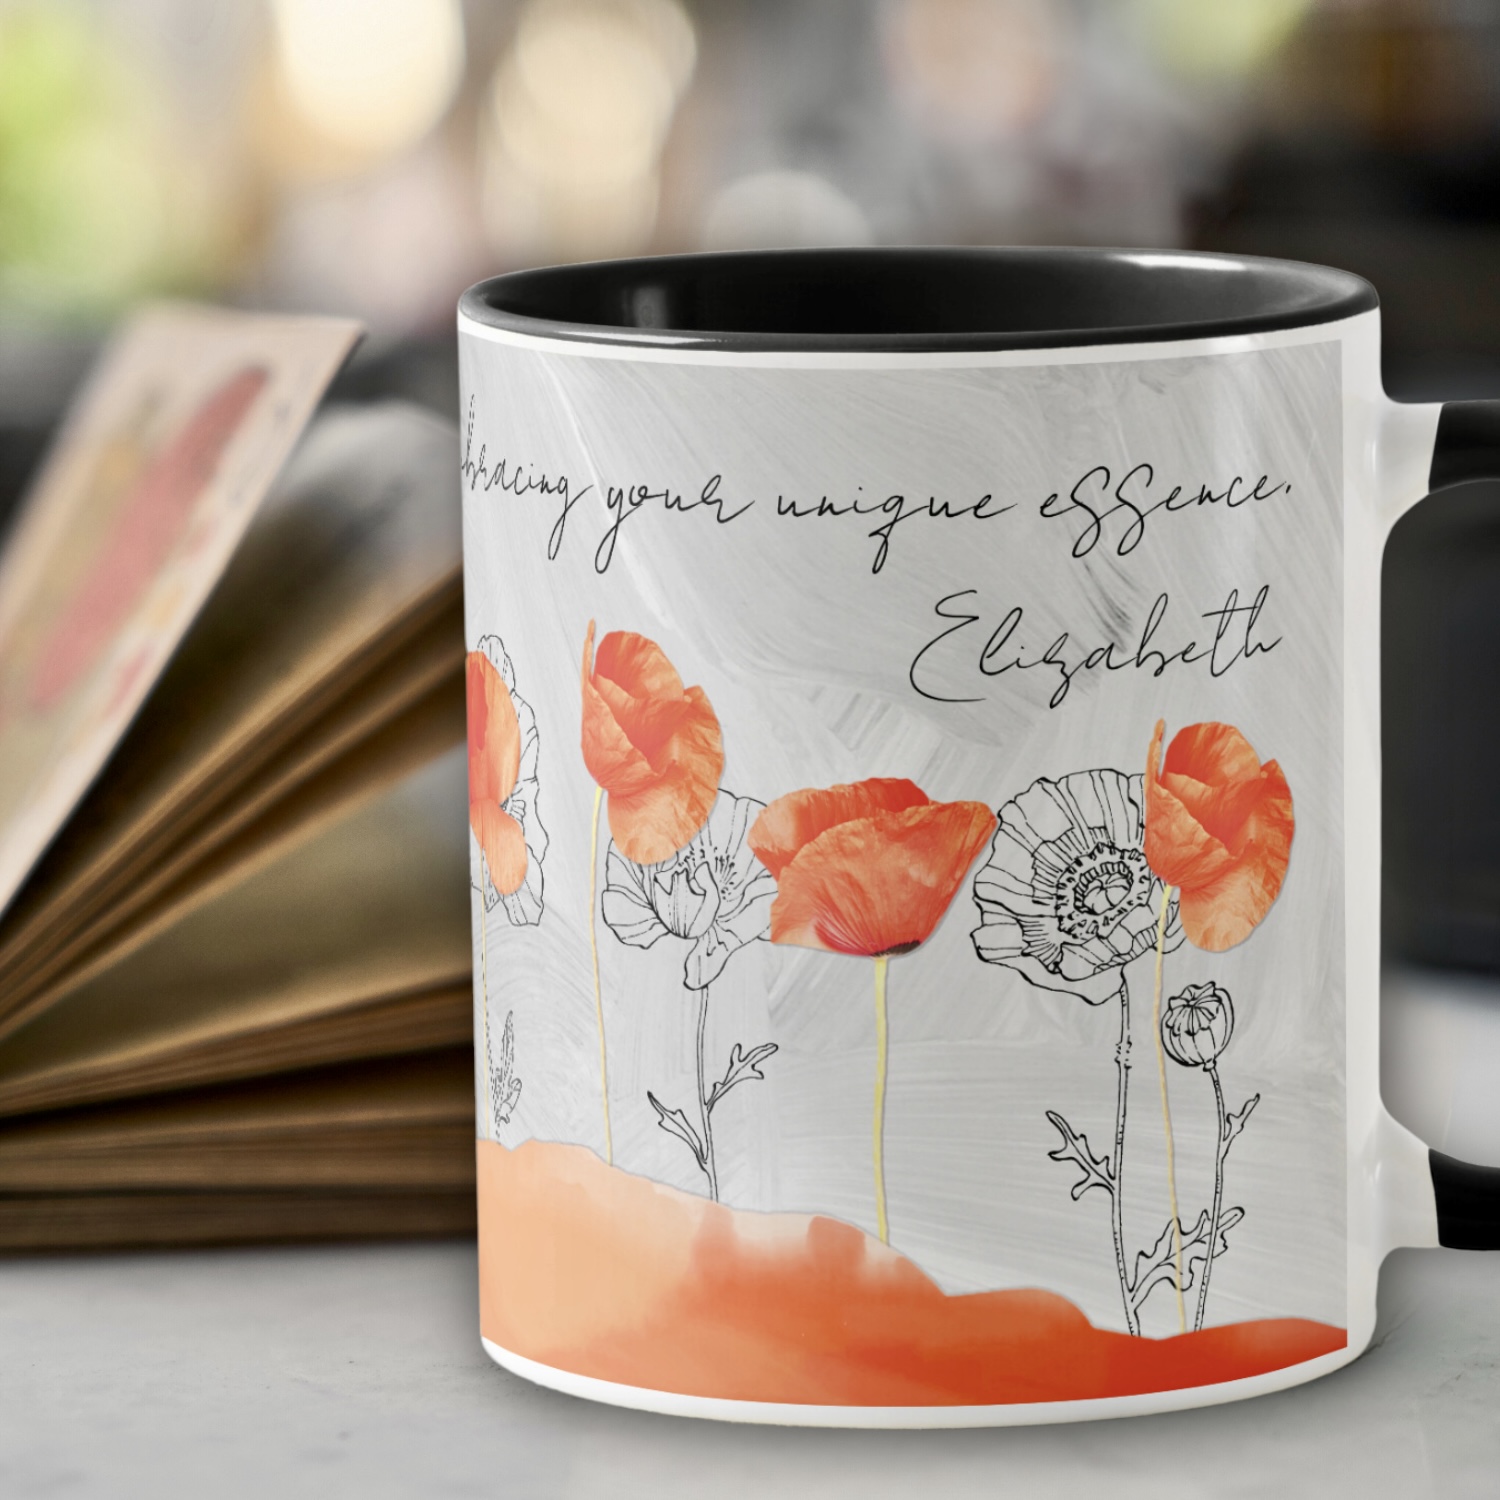 Gray coffee mug with bright orange poppy flowers and a black and white flower drawing on the background.